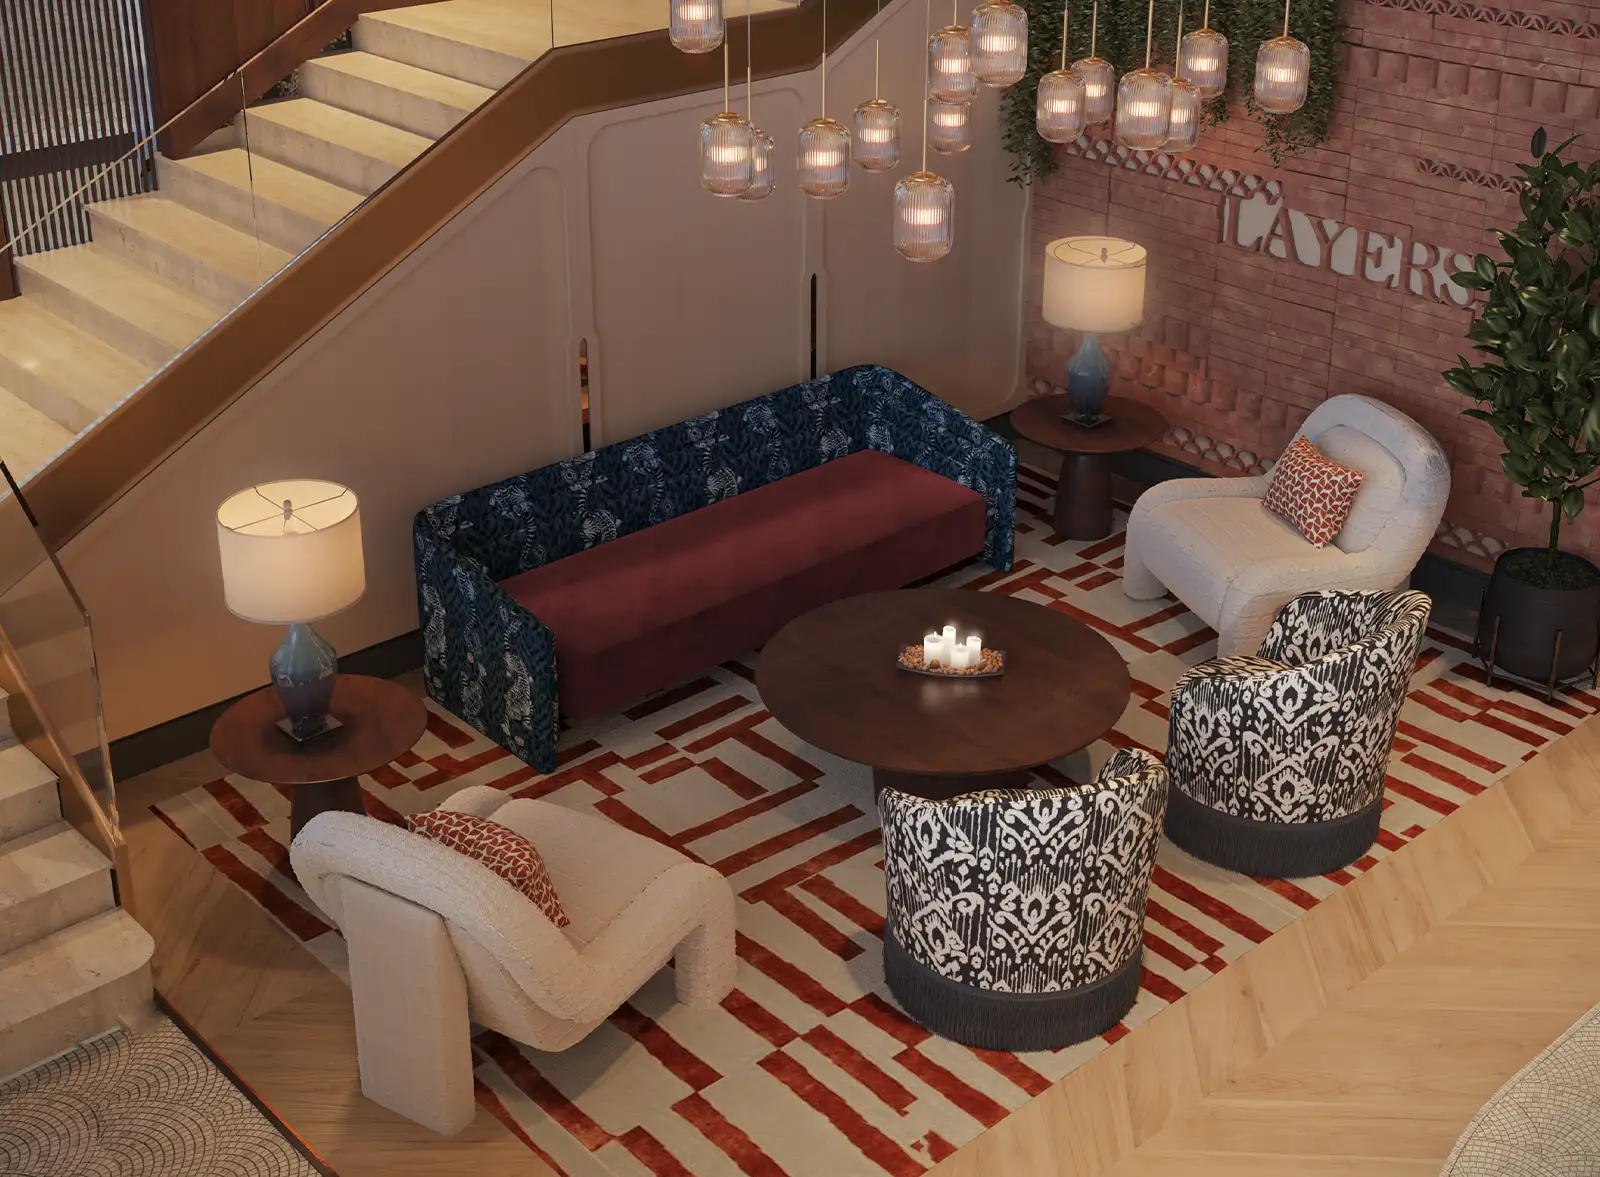 Cozy lounge area with eclectic interior design, featuring a patterned rug, a mix of plush armchairs with bold prints, a burgundy sofa, a round wooden coffee table, and ambient lighting from hanging pendant lamps, creating a warm and inviting atmosphere